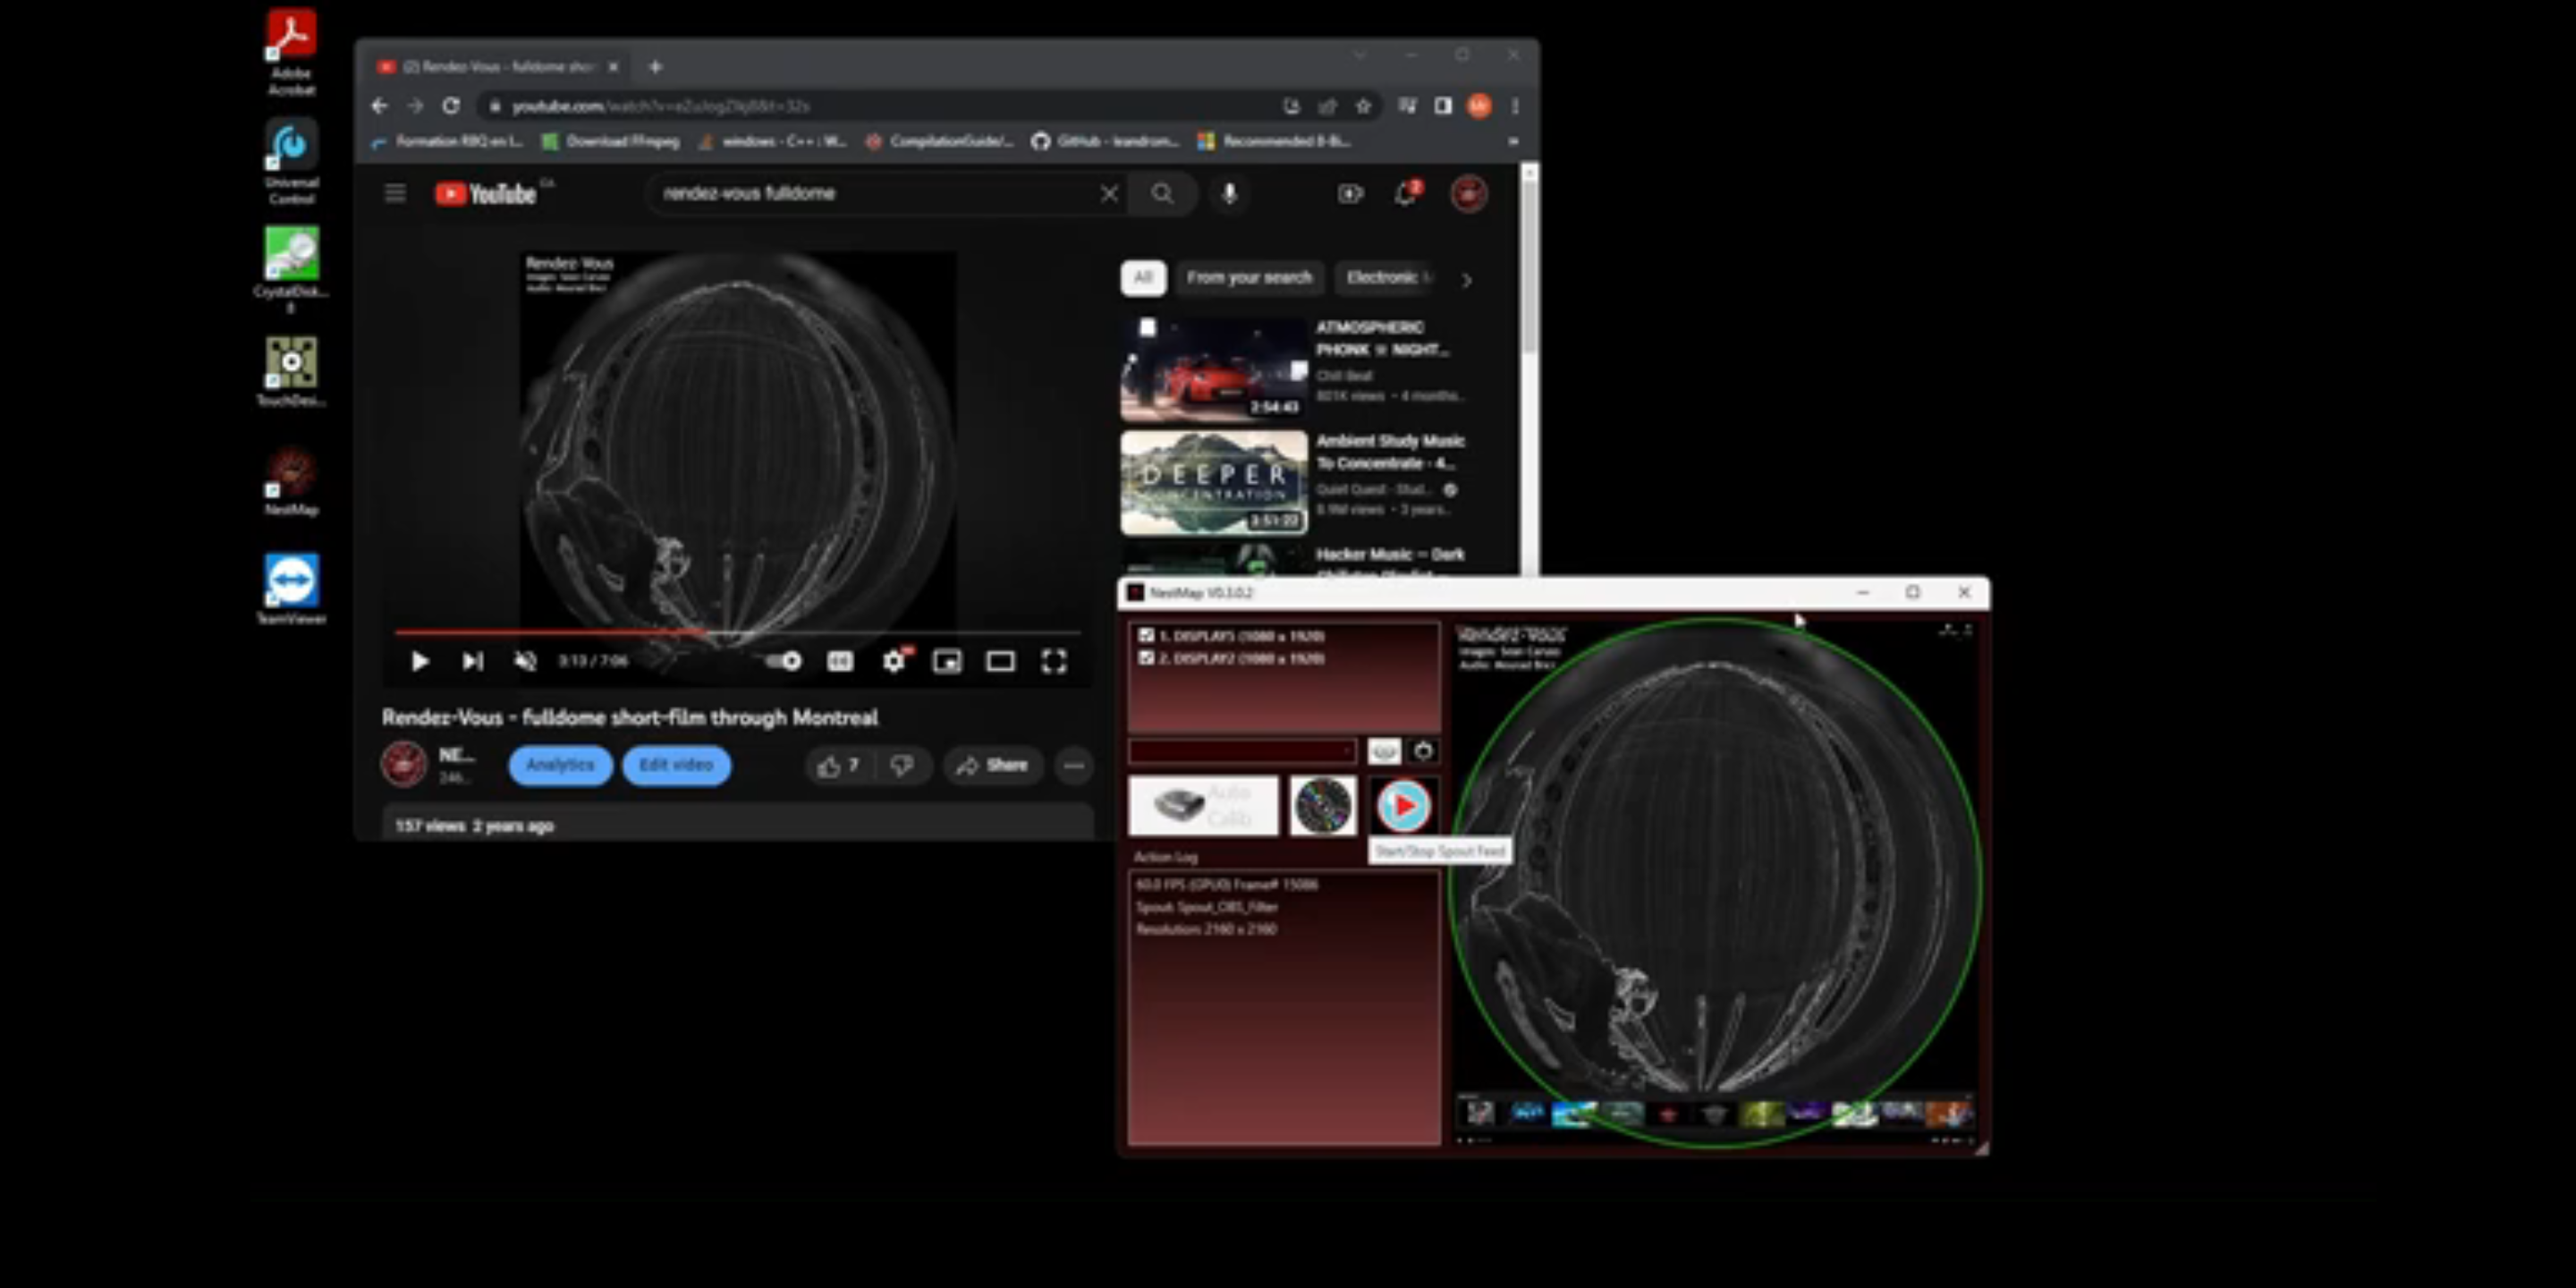 Cover image for Tutorial: how to stream YouTube content to Immersive dome easily